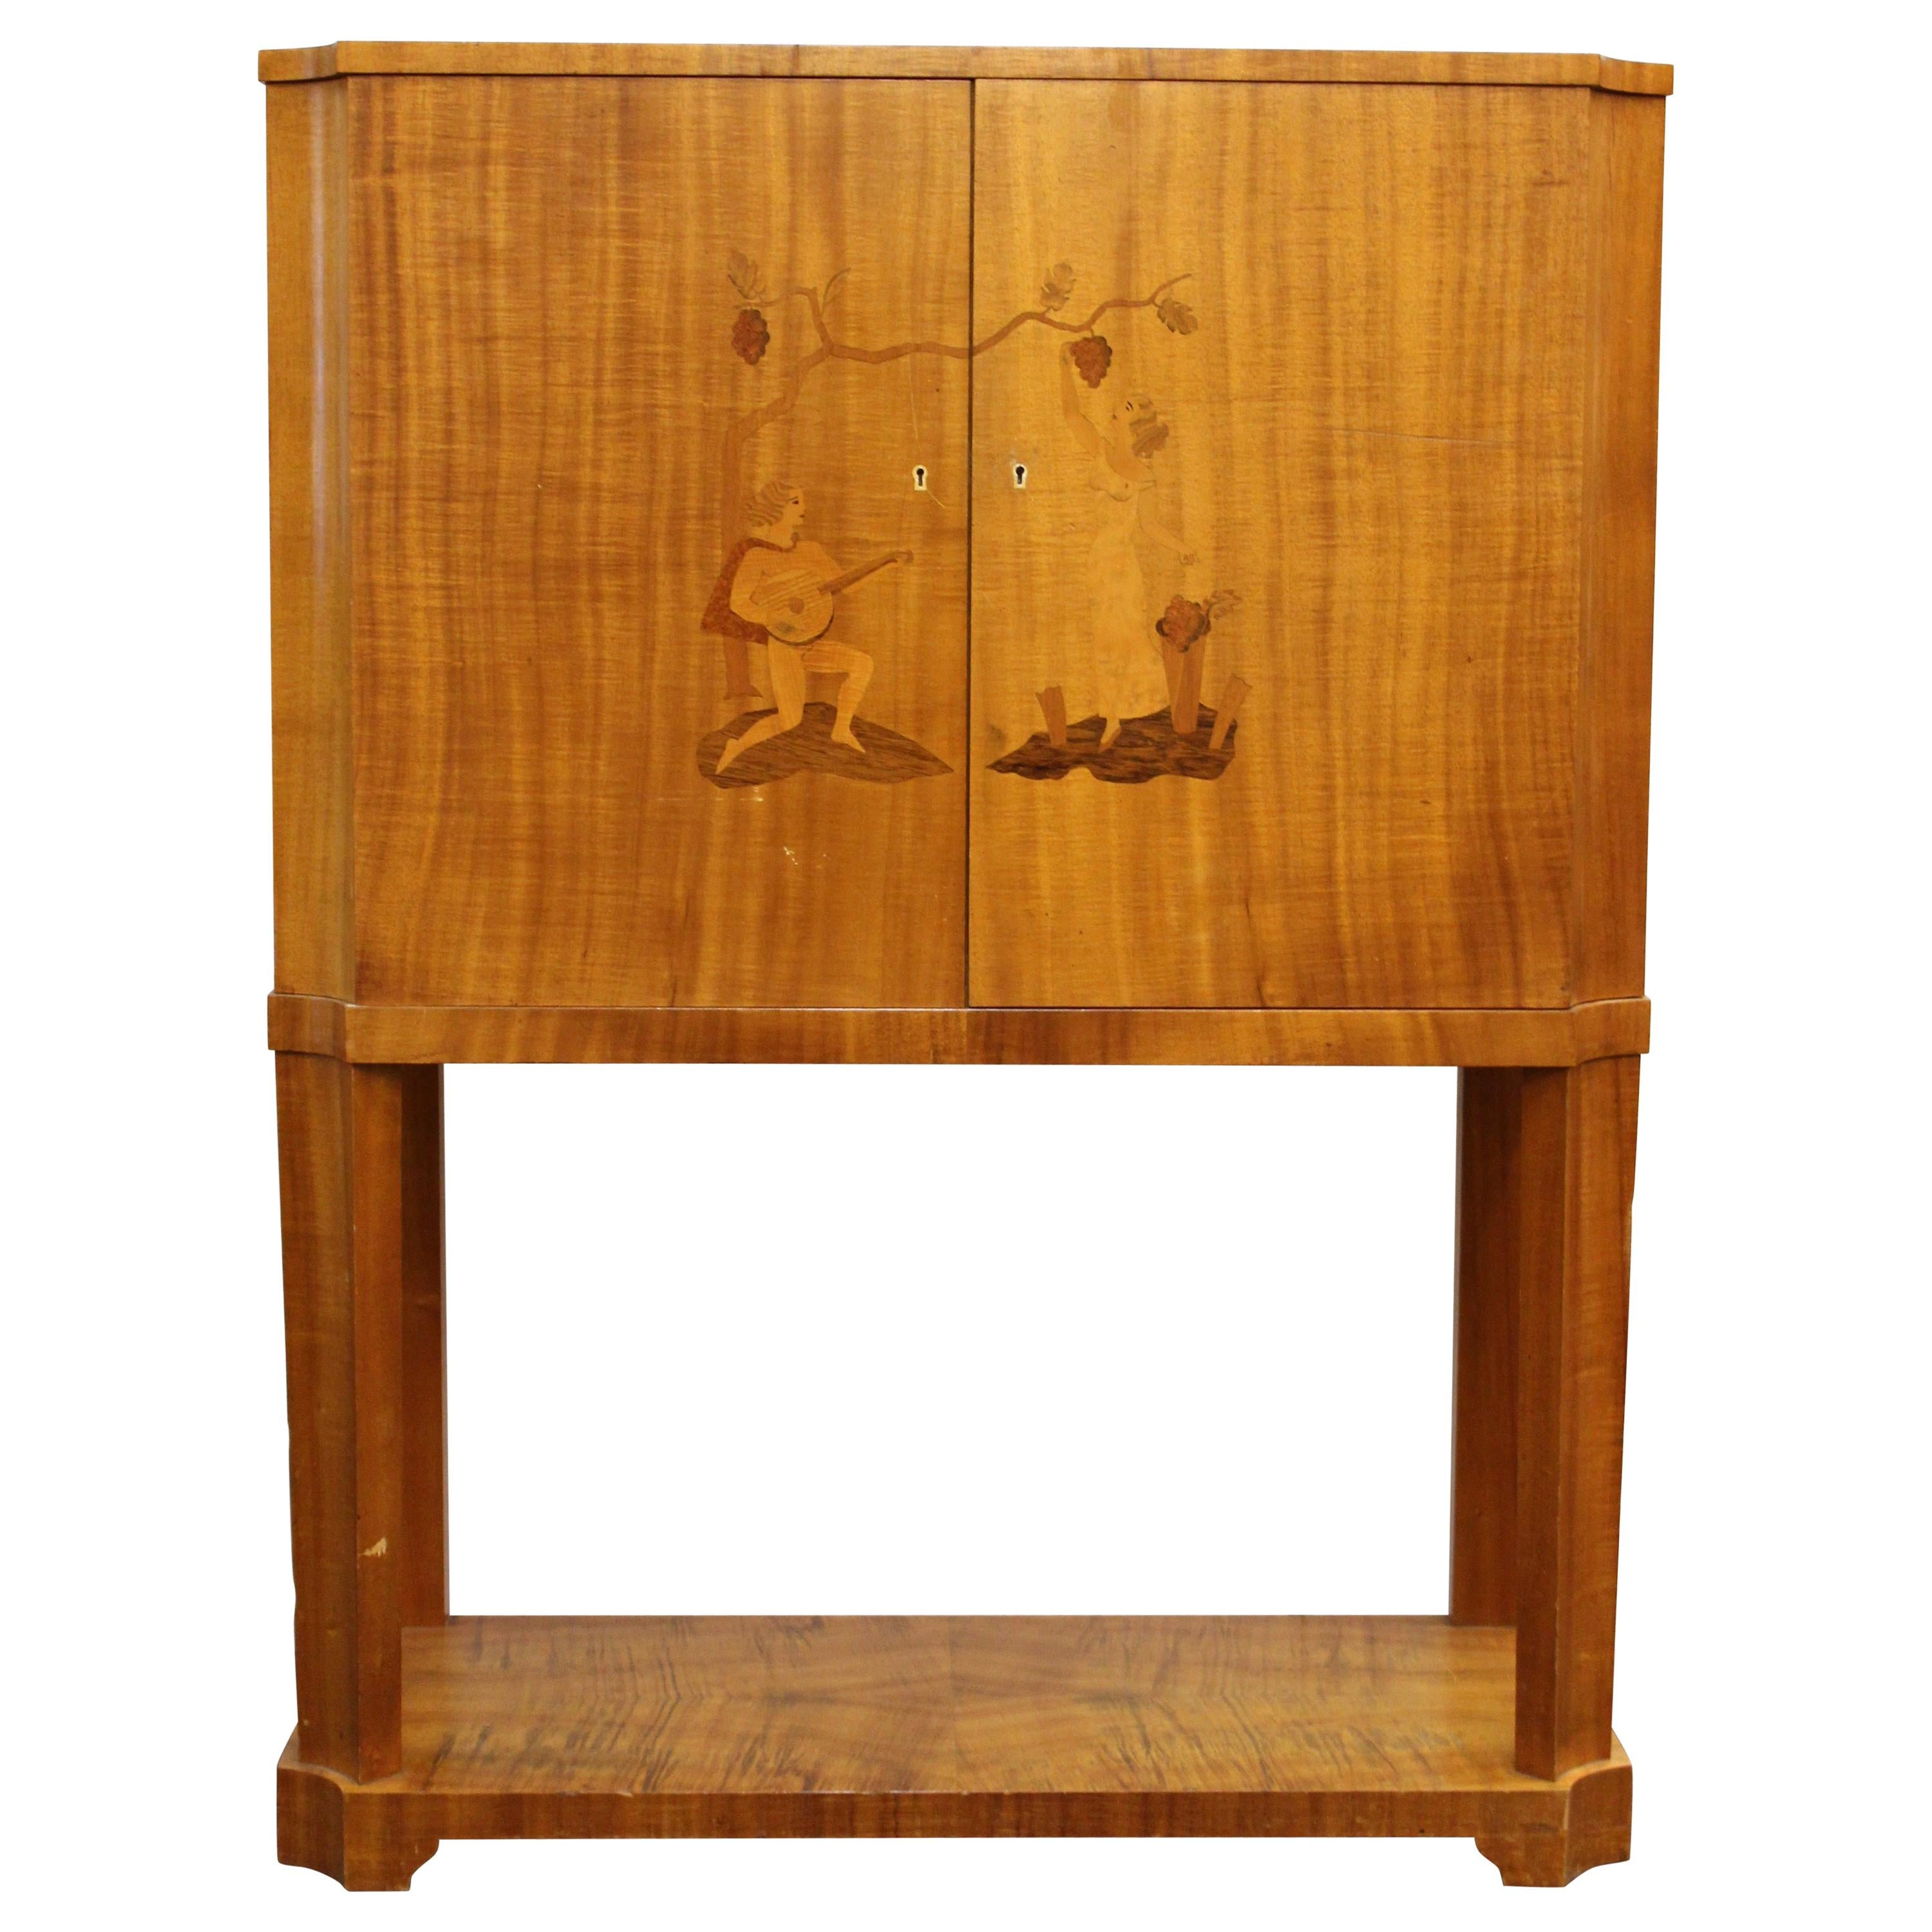 Swedish Art Deco Dry Bar or Bar Cabinet in Blonde Wood with Inlaid Illustration